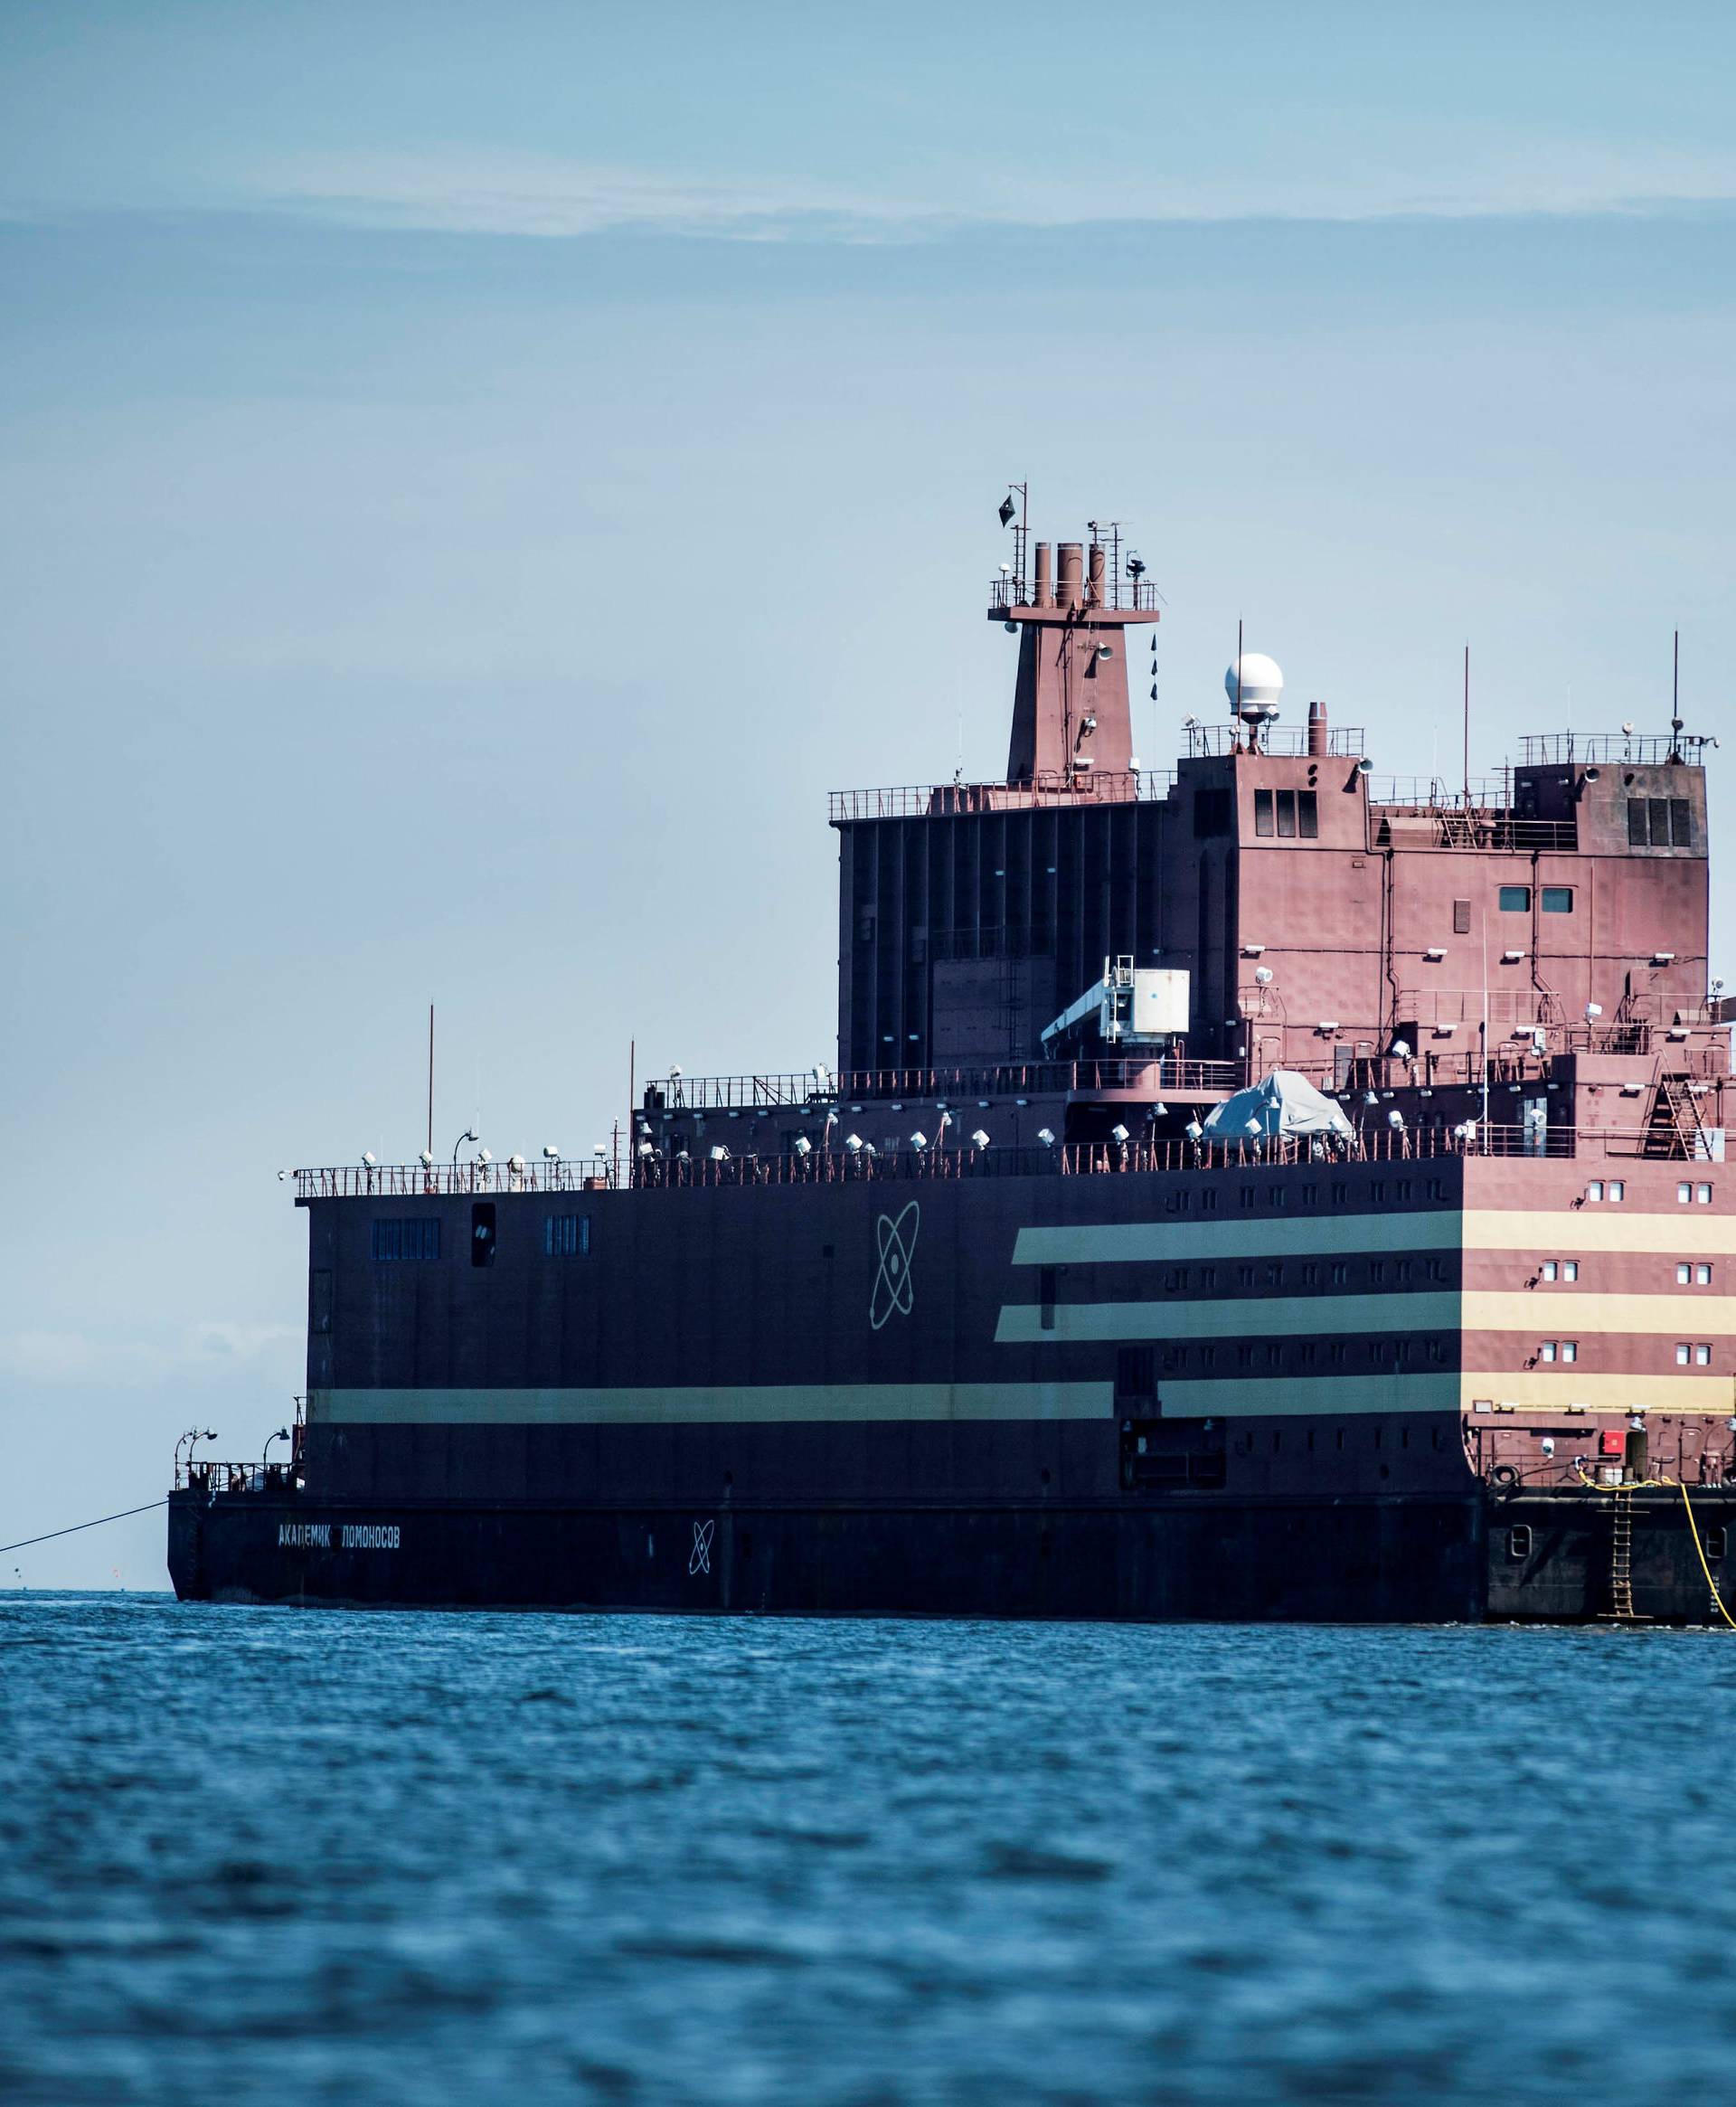 The Russian "Academy Lomonosov", the world's first floating nuclear power plant, passes Langeland island